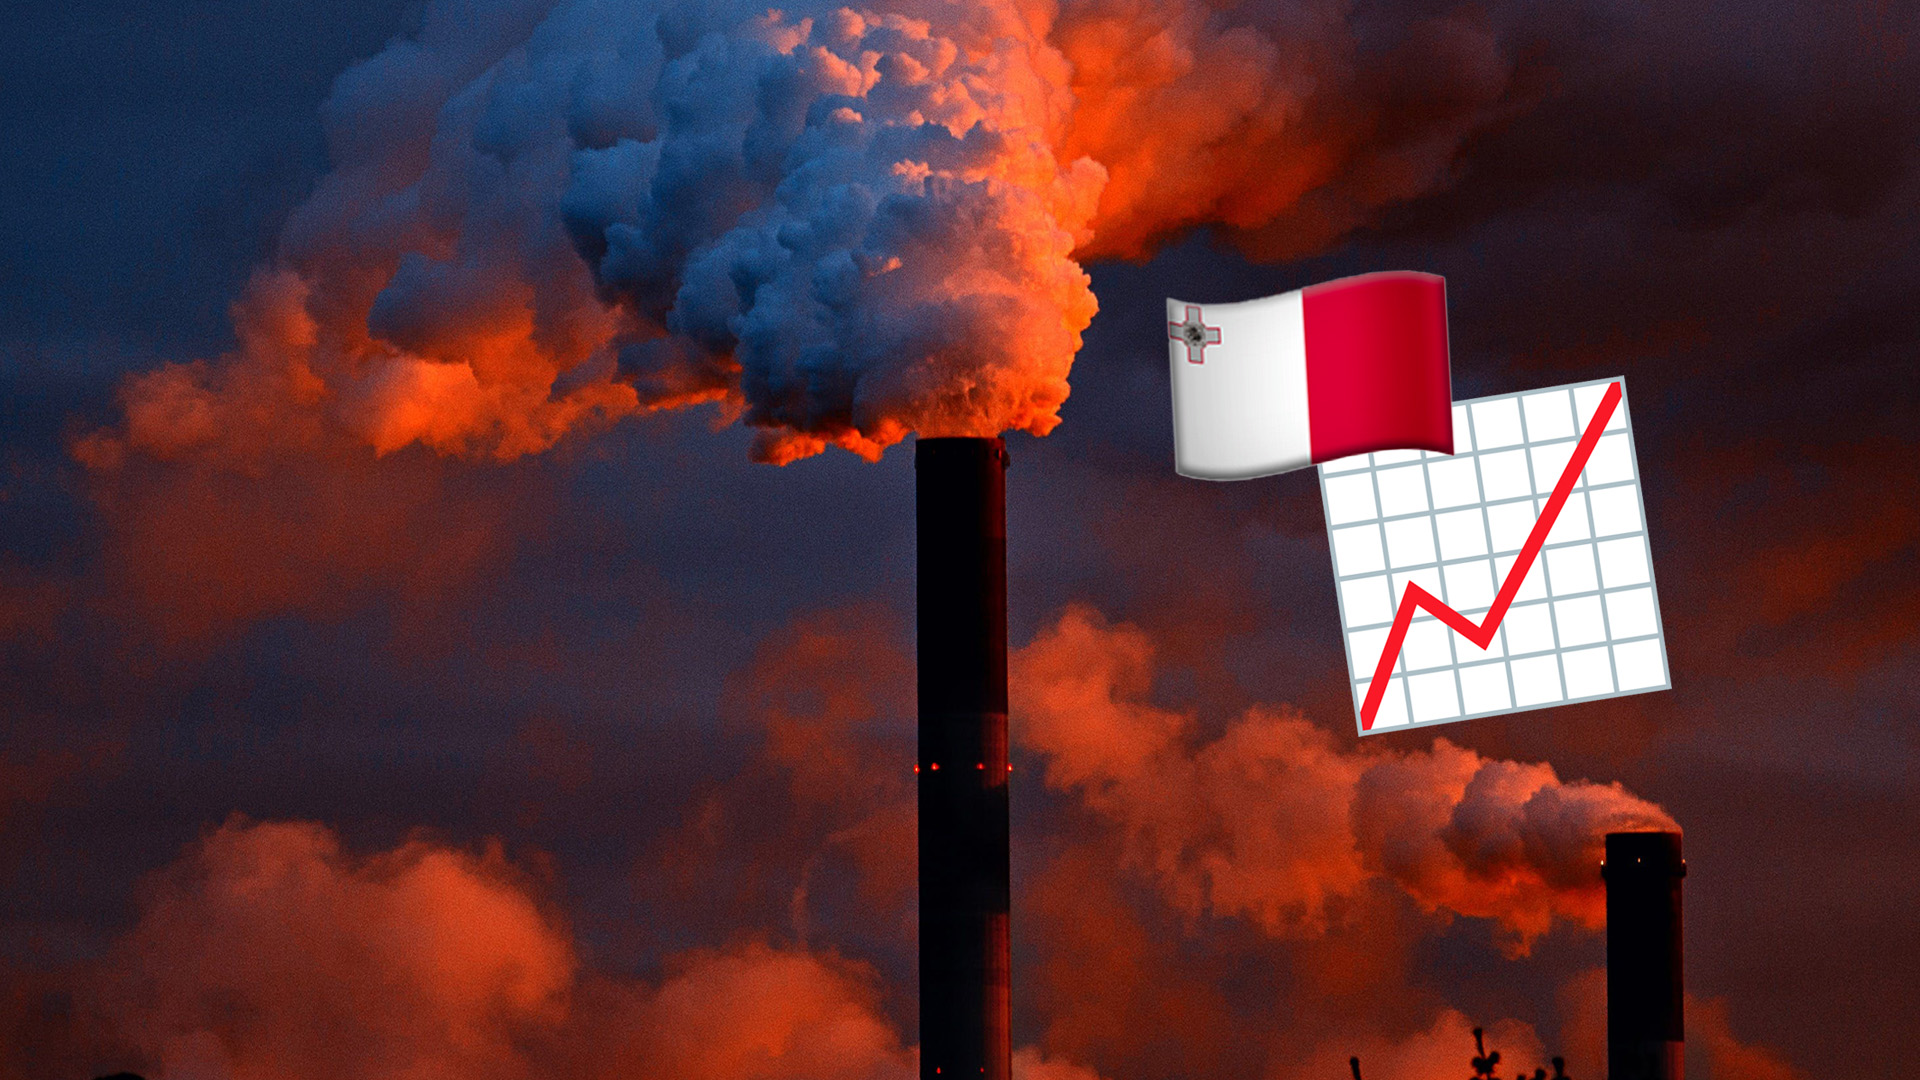 Malta With Biggest Increase in Greenhouse Gases Across EU